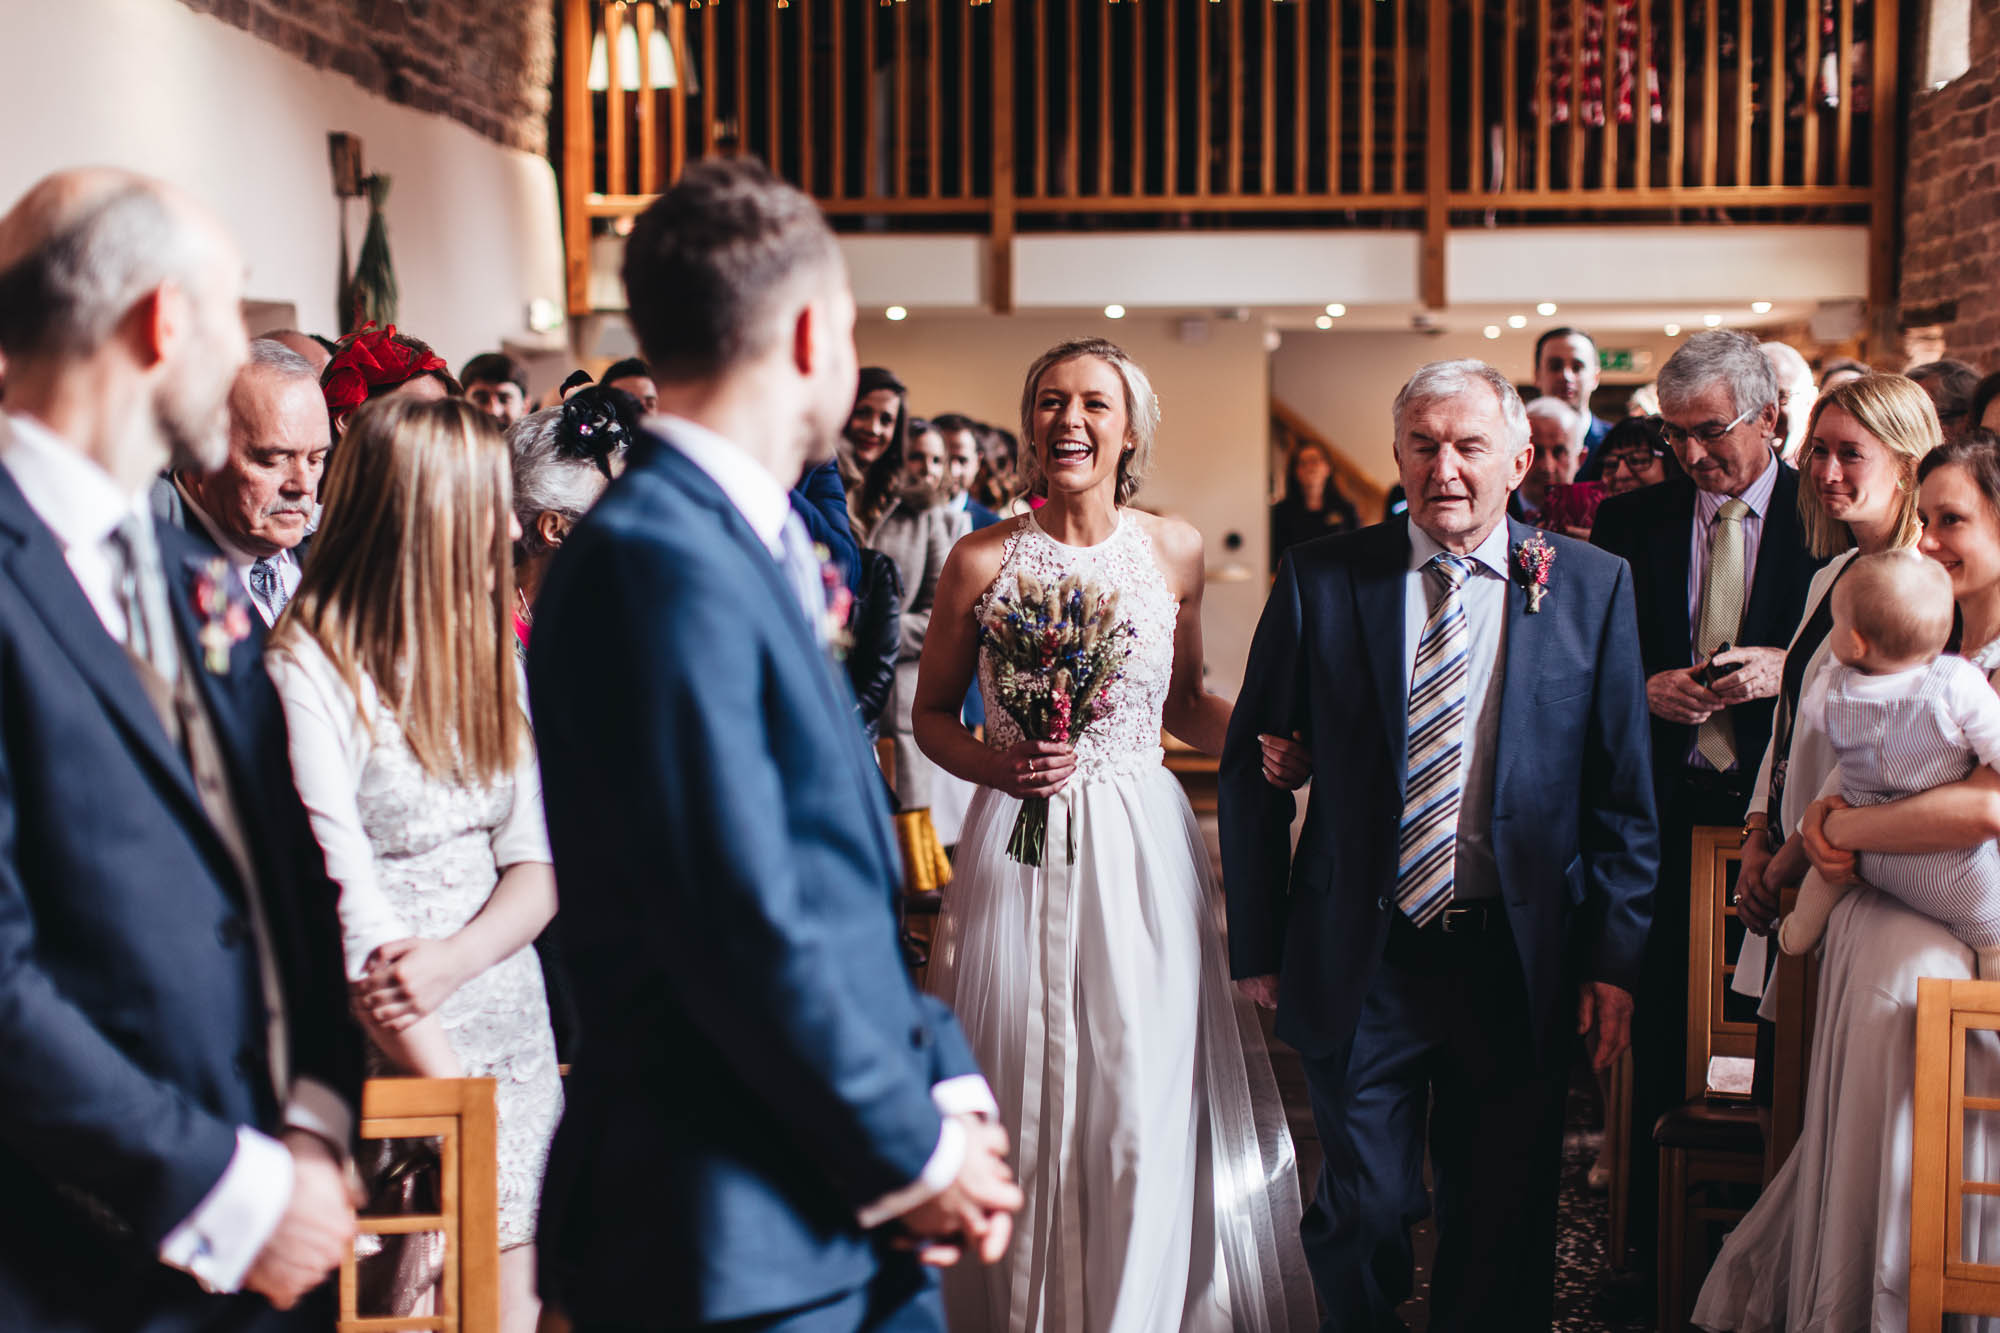 Bride smile at Groom as she approaches with Father of Bride in wedding barn